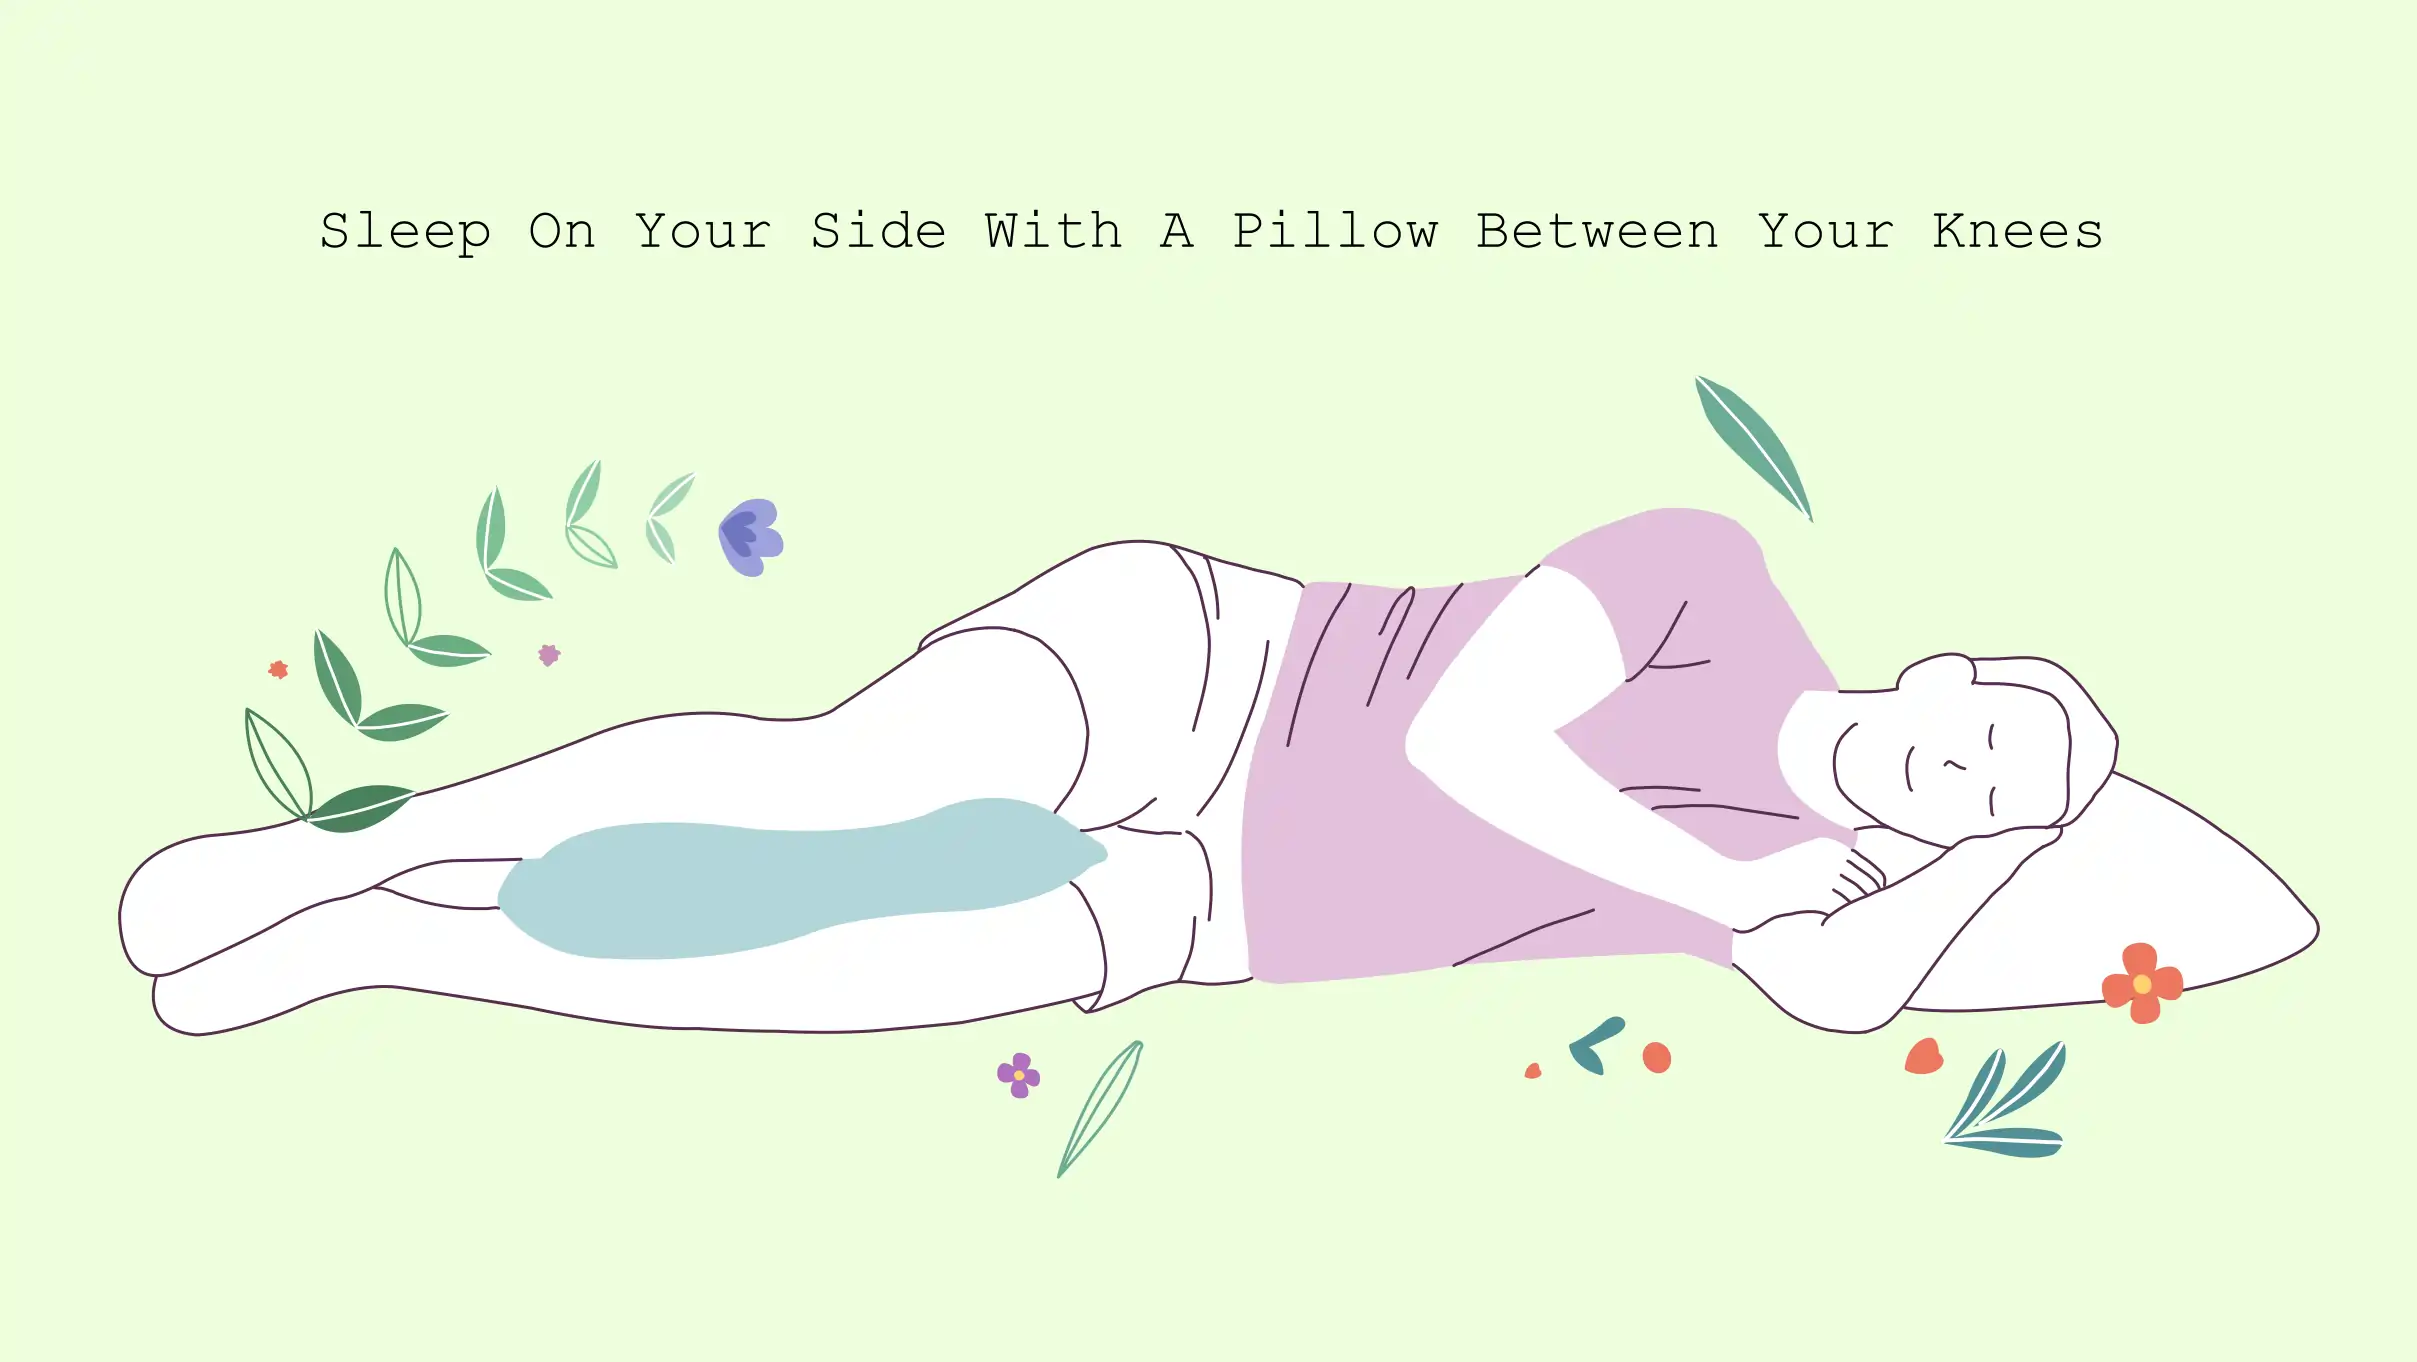 Sleeping With a Pillow Between Your Knees